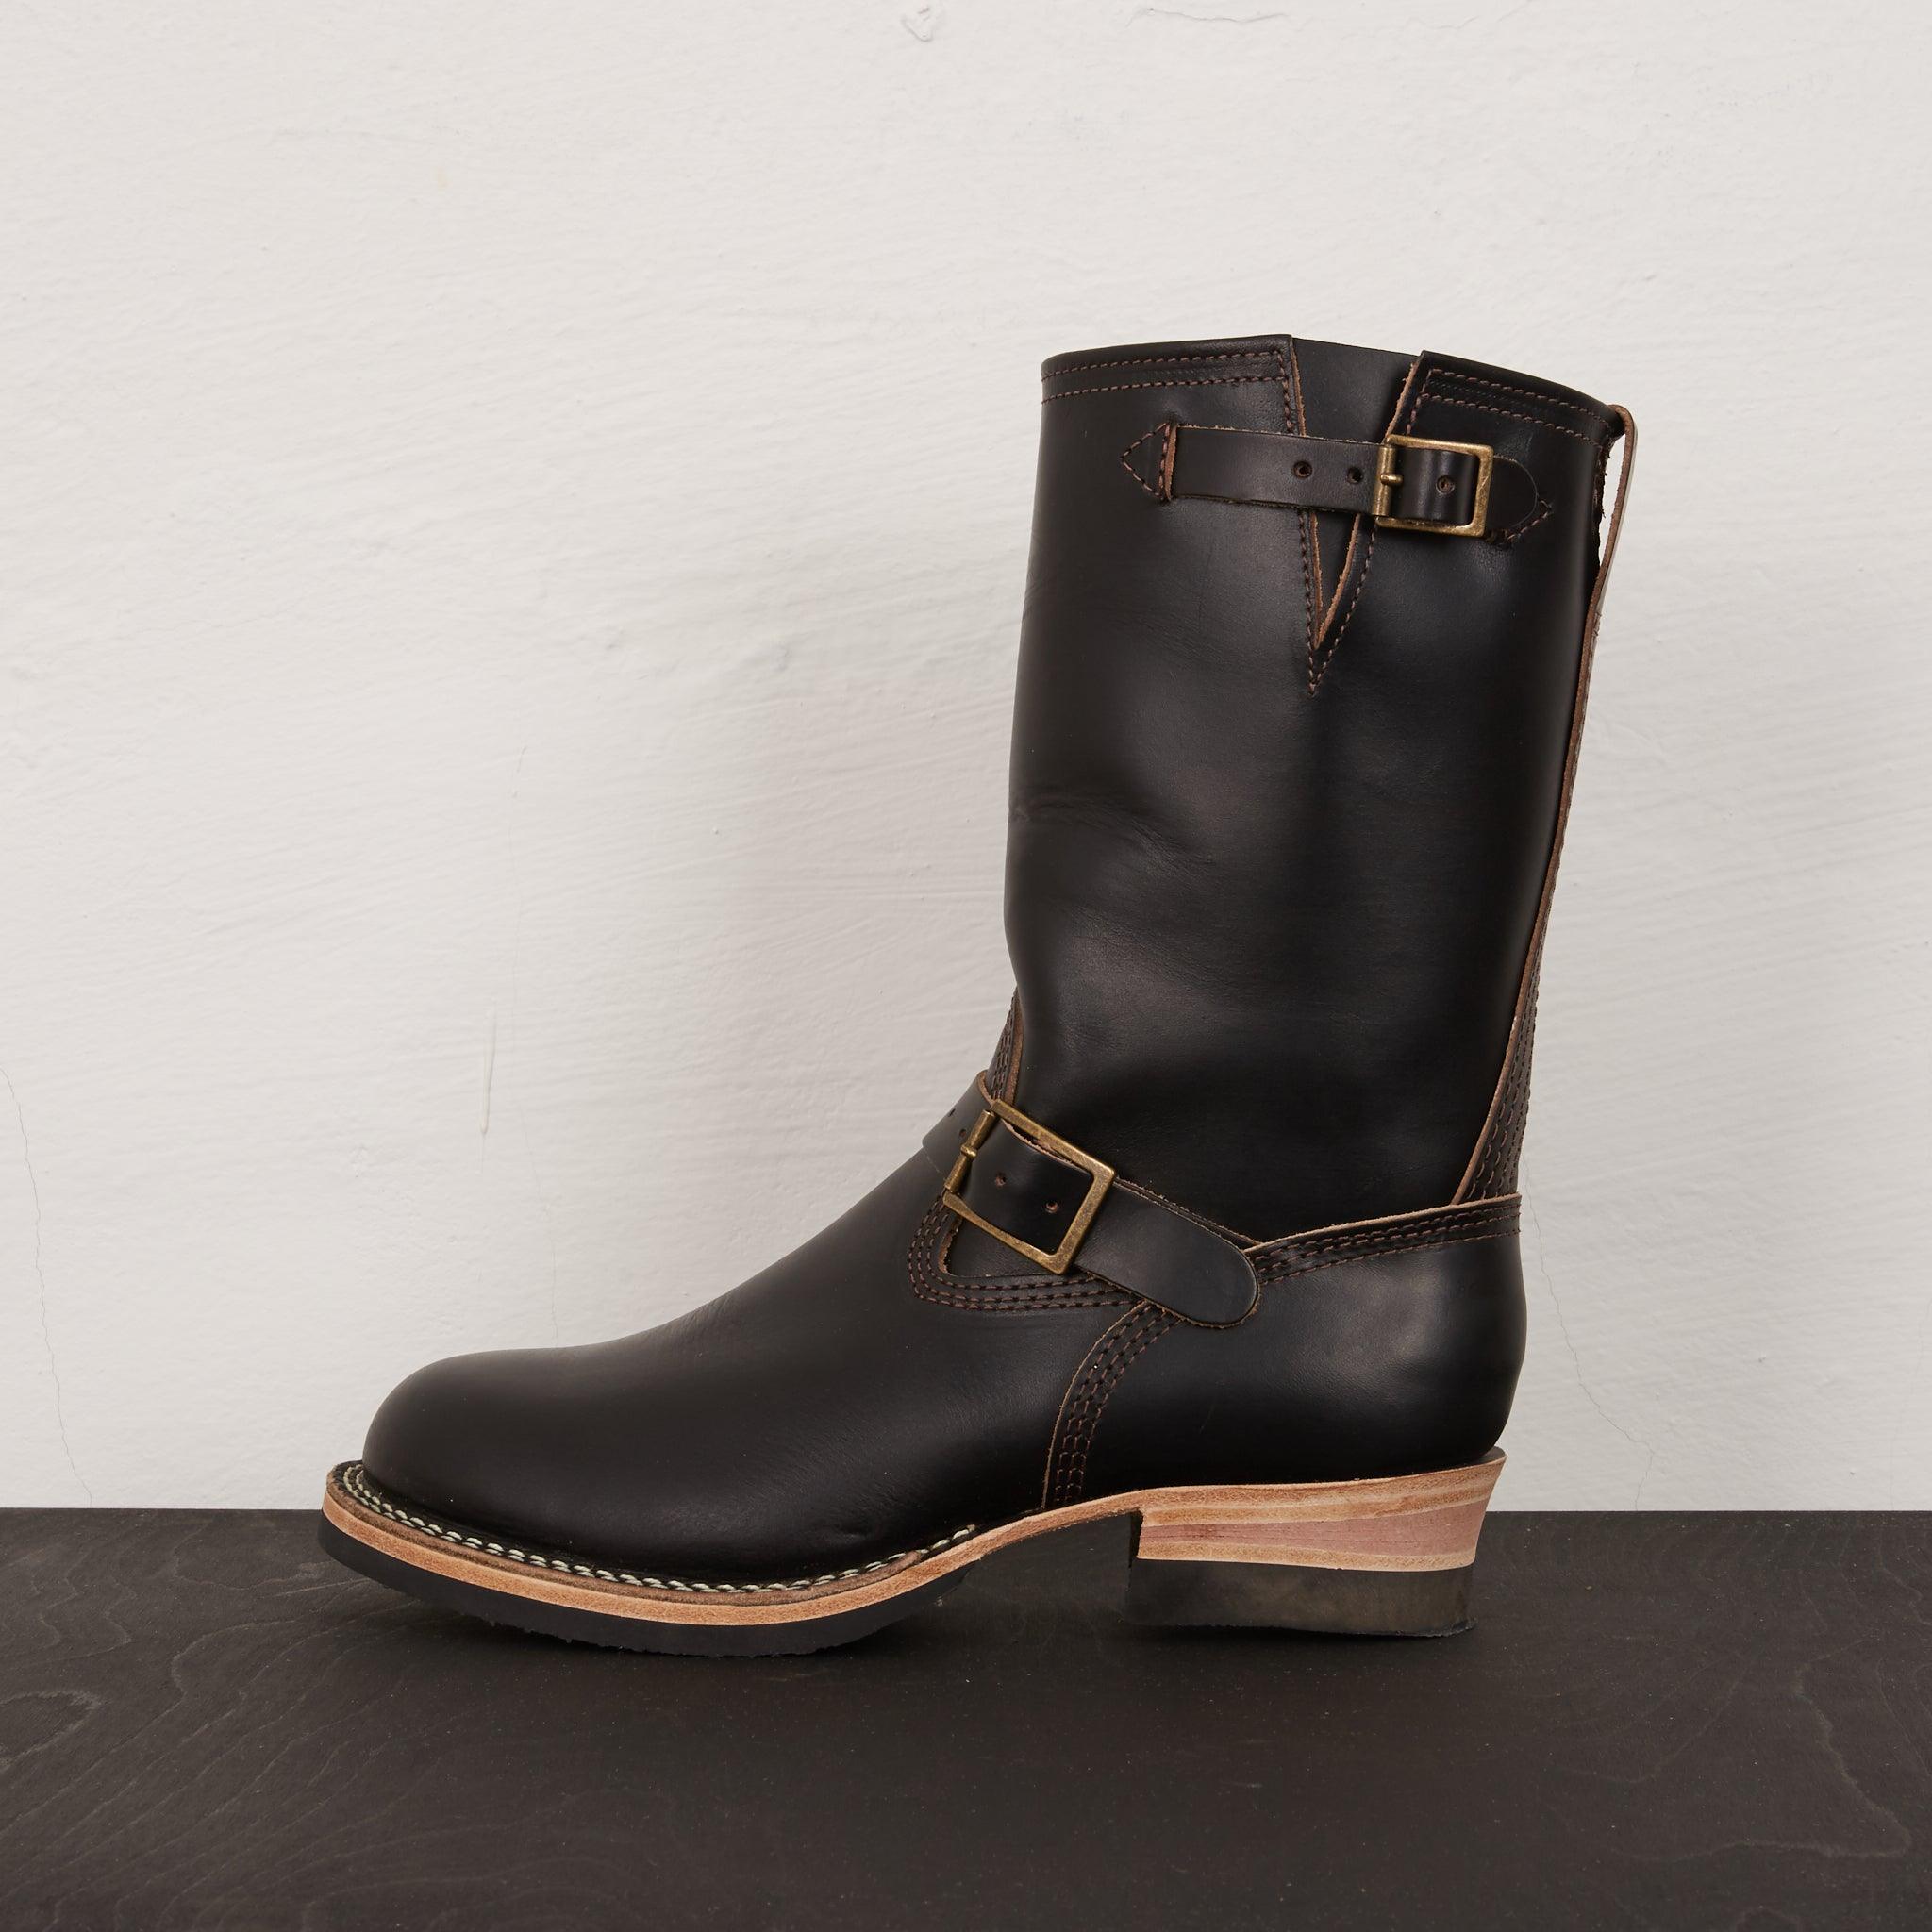 Image showing the WESCO - Custom Boss Engineer Black Chromexcel which is a Boots described by the following info Boots, Footwear, Wesco and sold on the IRON HEART GERMANY online store